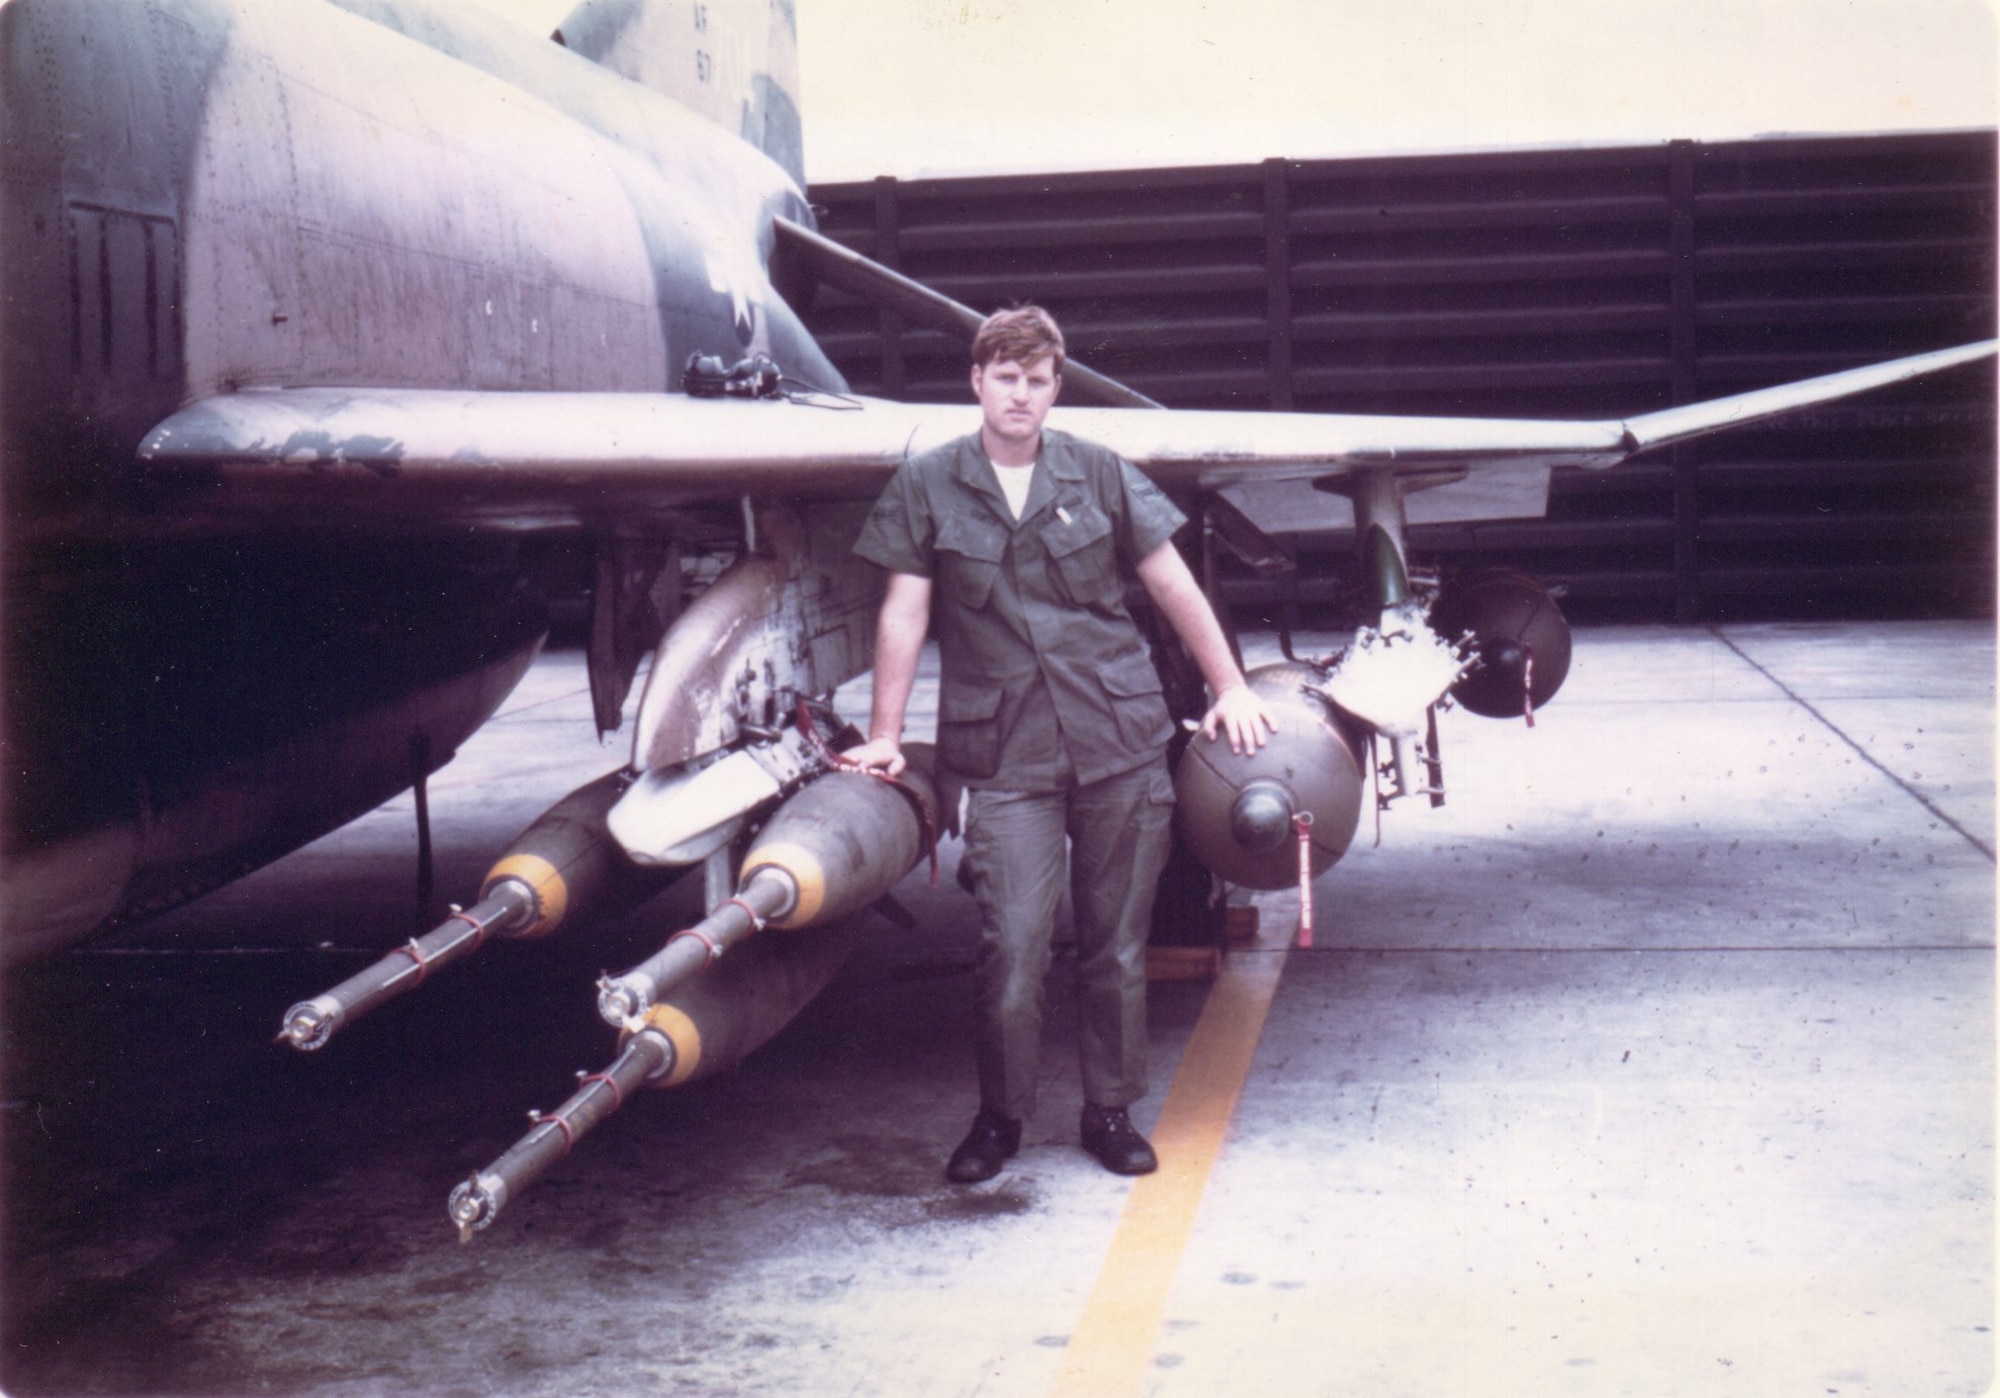 Sgt Ken Coats was a crew chief in the 555th Tactical Fighter Squadron at Udorn Royal Thai AFB from September 1970 to September 1971.  He is pictured here with F-4D 66-7704 loaded with Mk 82 500-lb bombs with fuze extenders and cluster bombs, ready for a mission over Laos. (Courtesy Ken Coats)